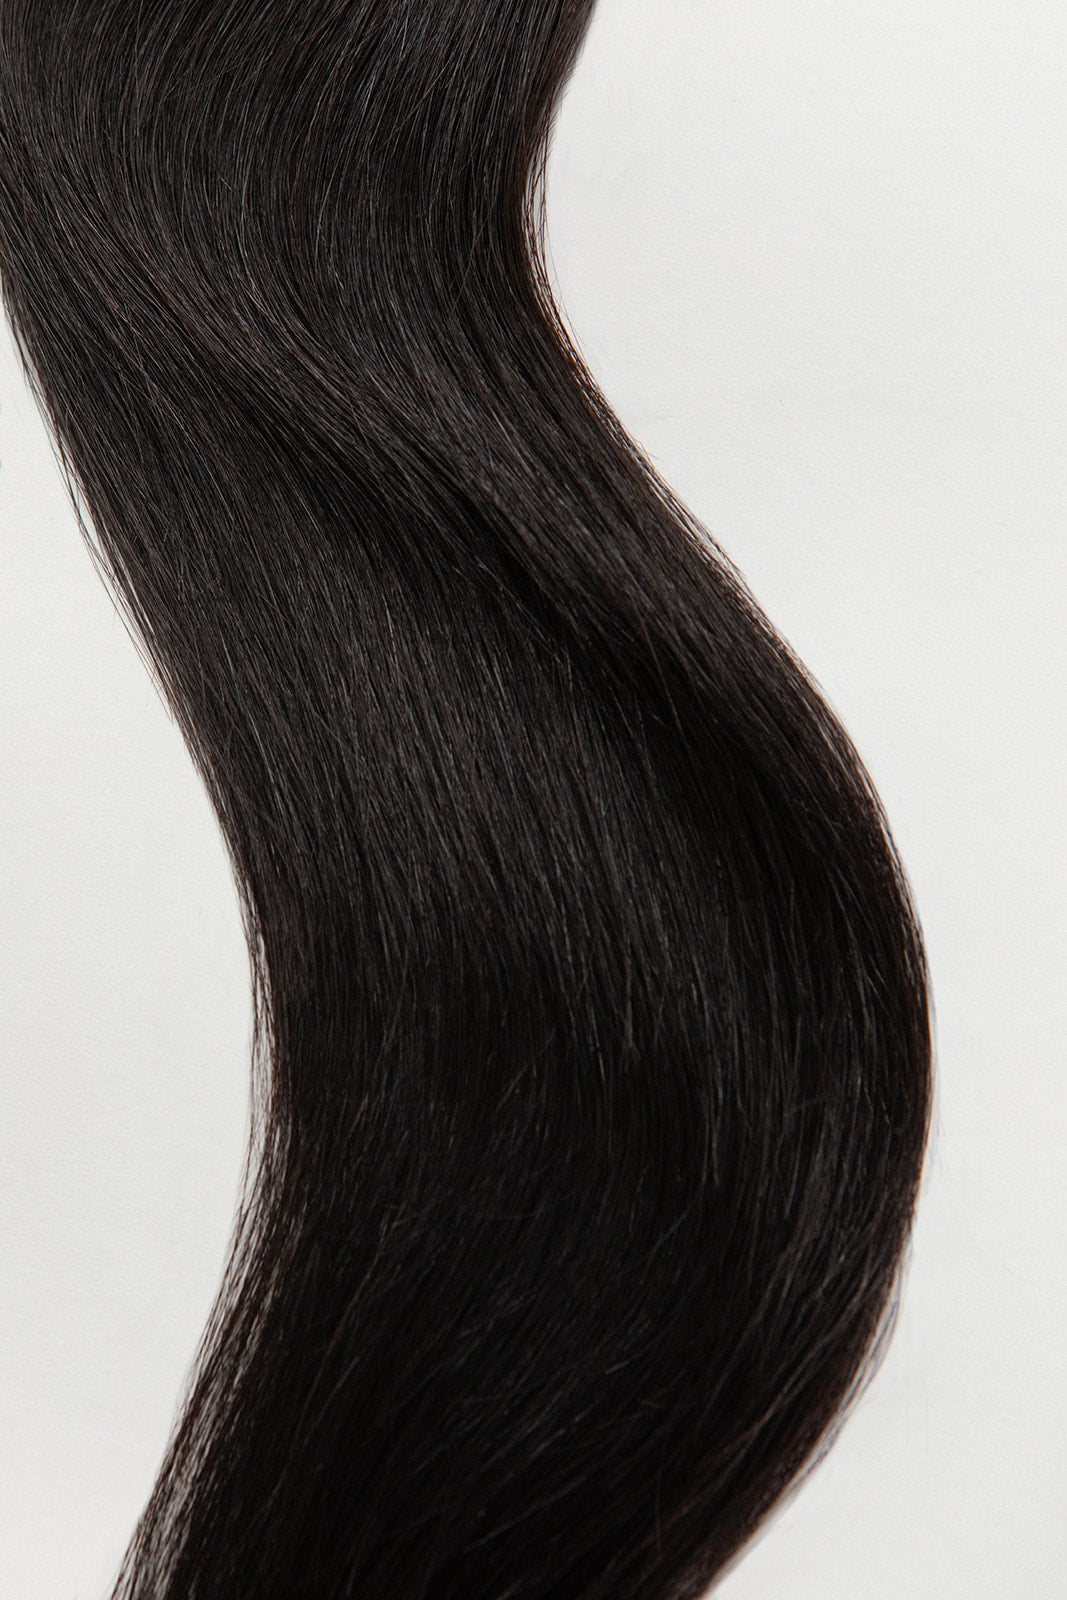 Nightfall is our darkest brown with cool undertones.  Stylist lingo: Natural level 3/4 Hidden Harloc Clip-In Extensions are made from ethically sourced, Remy Slavic hair. They come with 5 seamless silicone wefts to ensure an undetectable result that is comfortable to wear. Whether you are looking to add volume or length, a stunning look for a special event, or just want to look and feel gorgeous. Available in 10 of our beautiful shades.